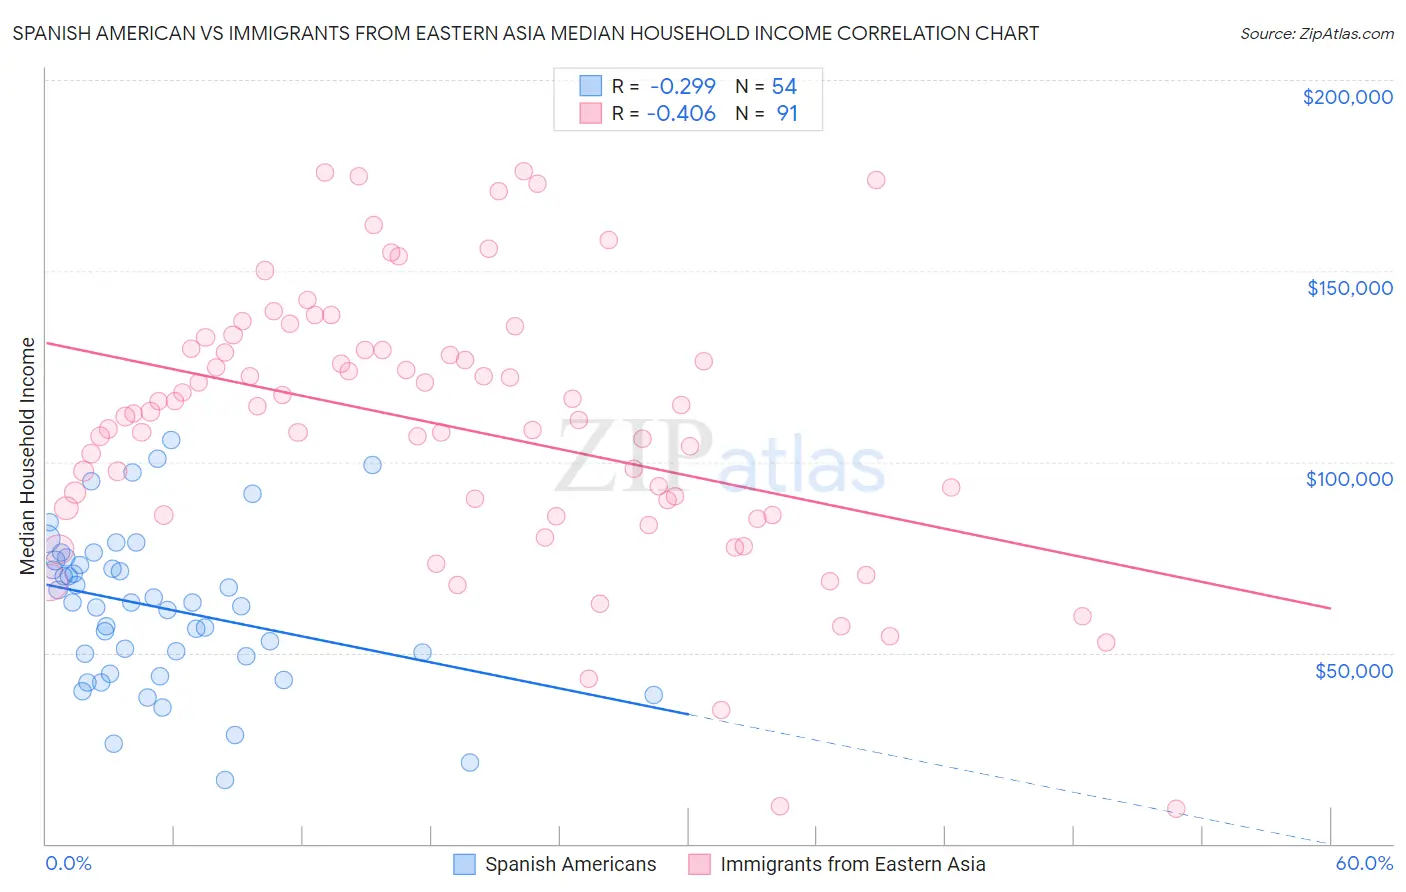 Spanish American vs Immigrants from Eastern Asia Median Household Income